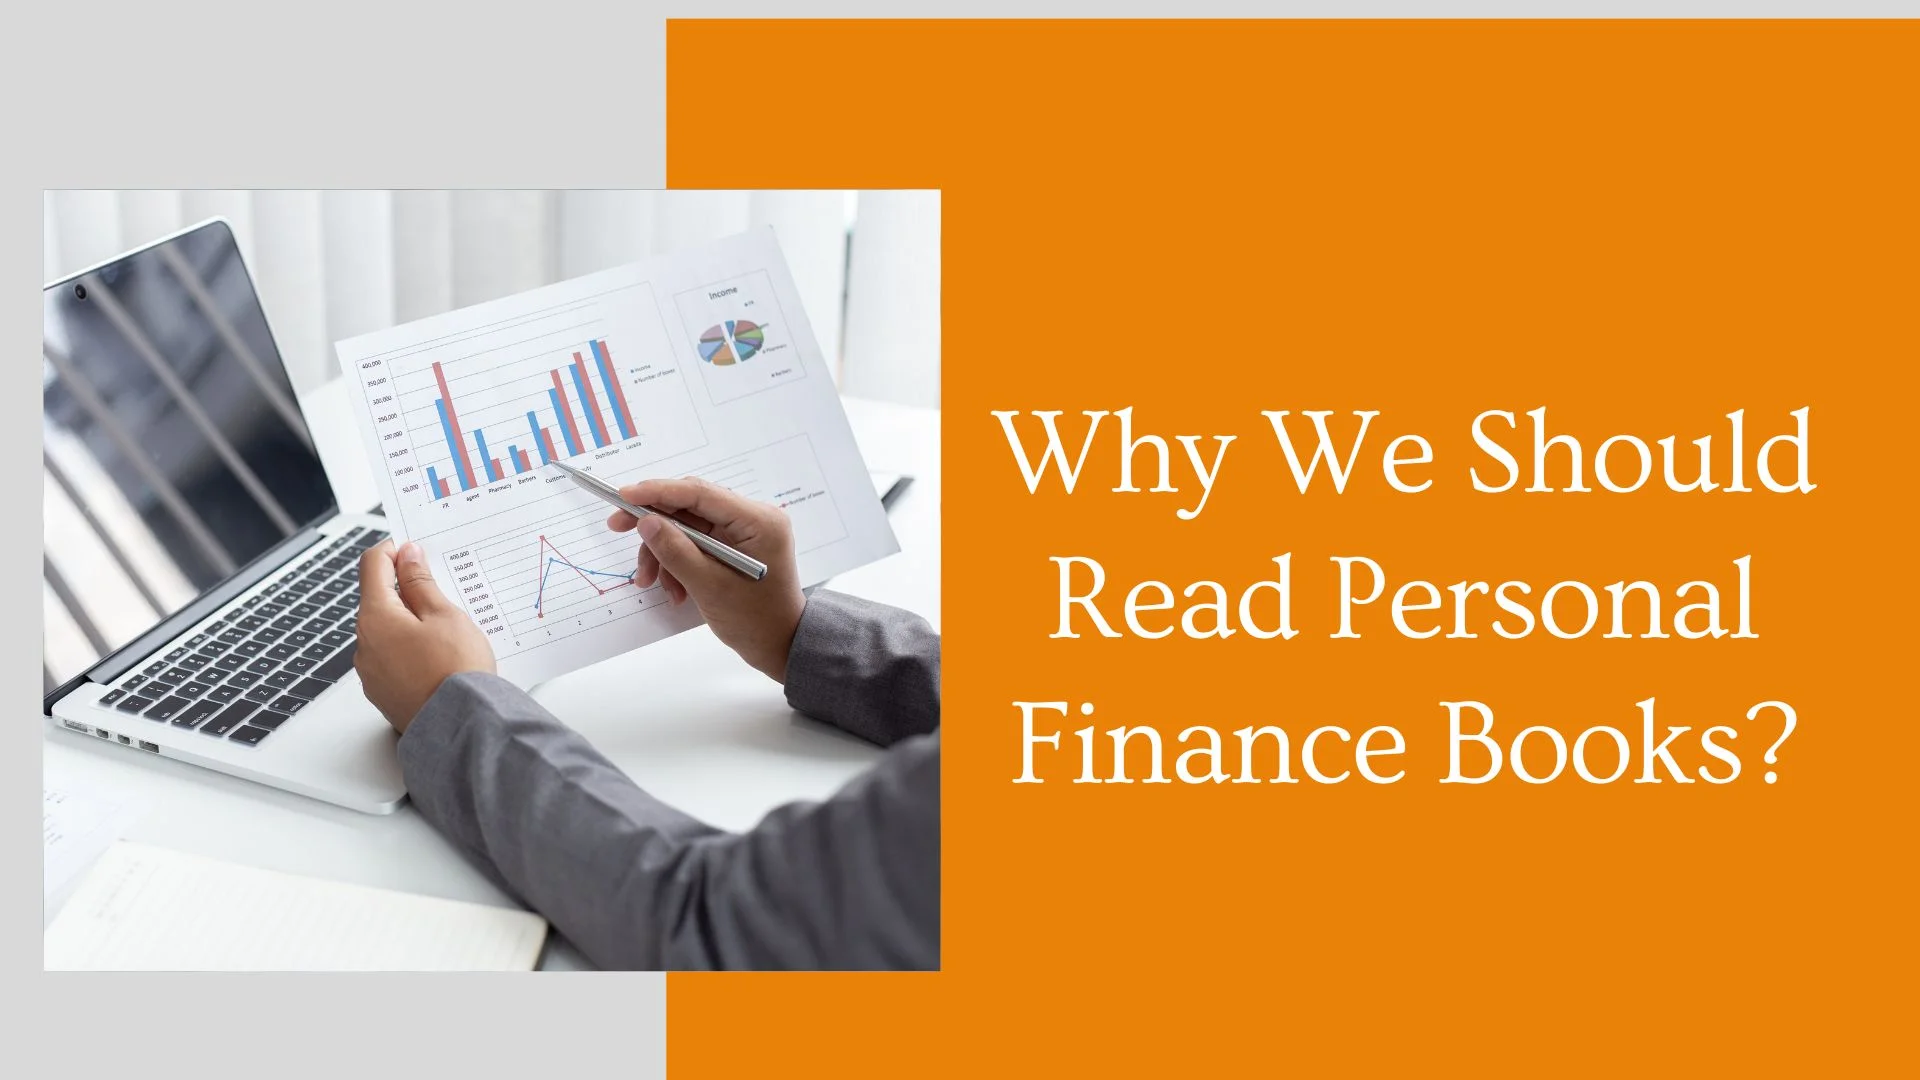 Why We Should Read Personal Finance Books